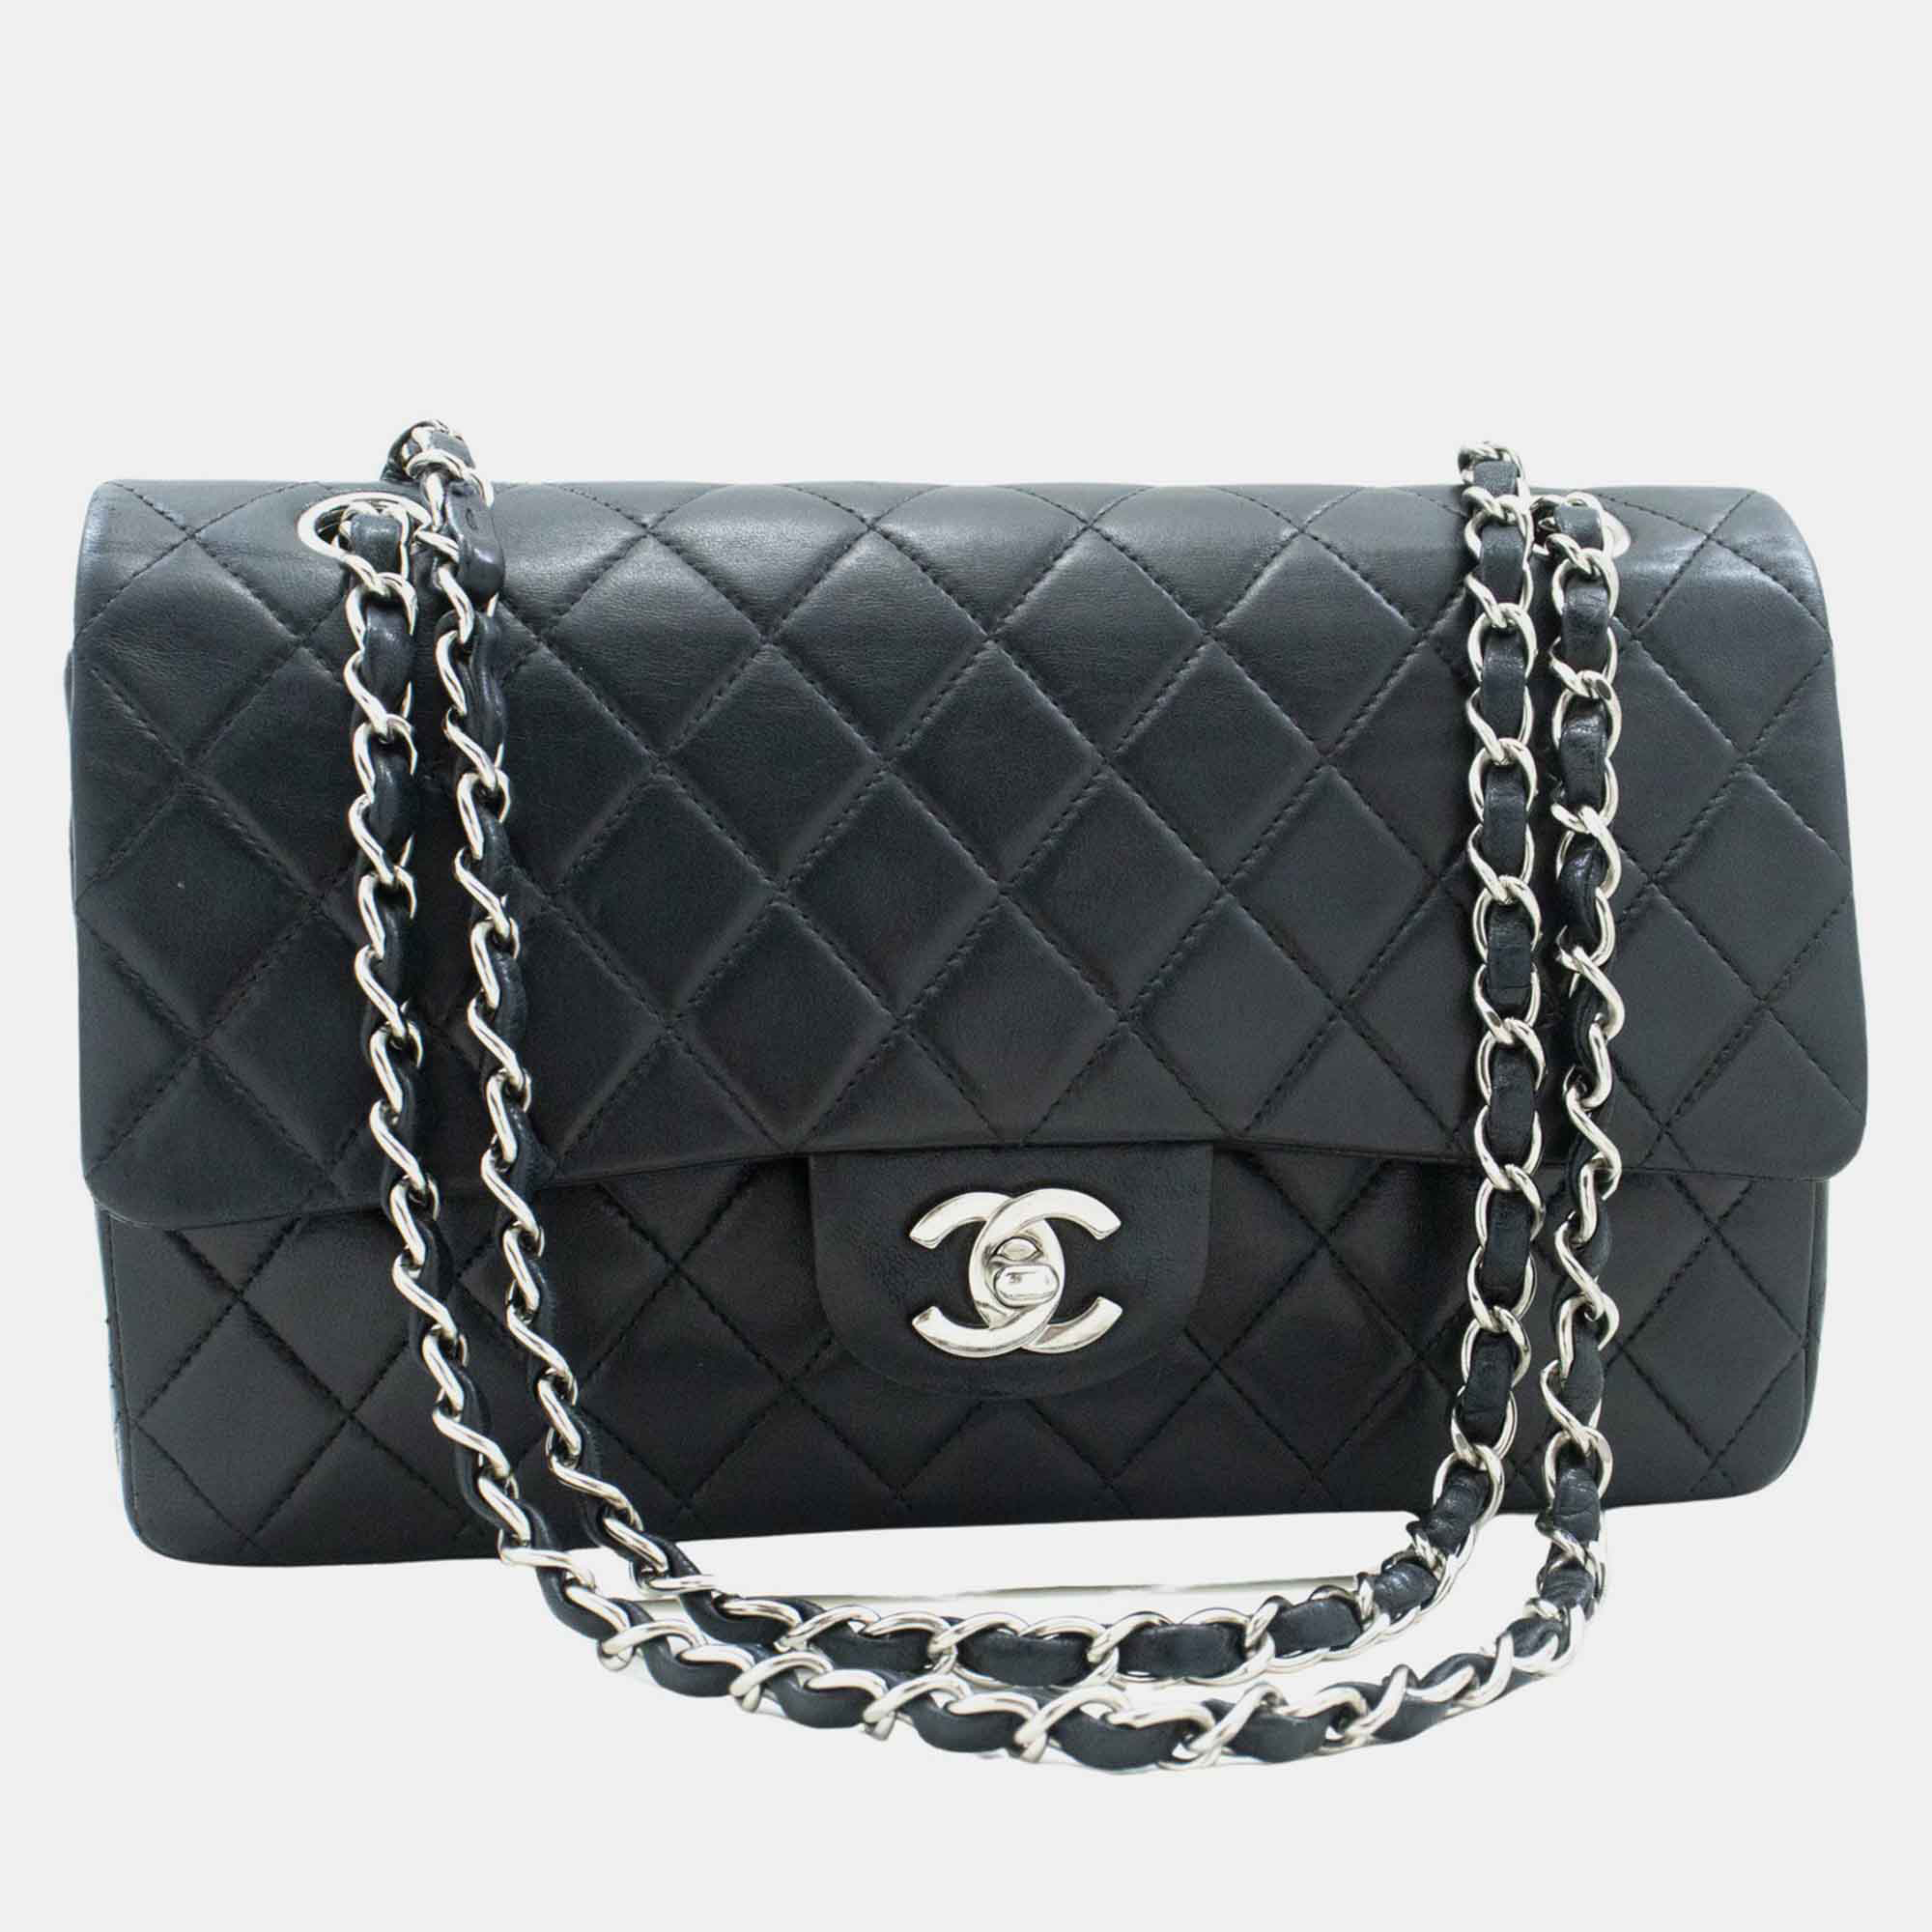 

Chanel Black Leather Classic Double Flap Bag